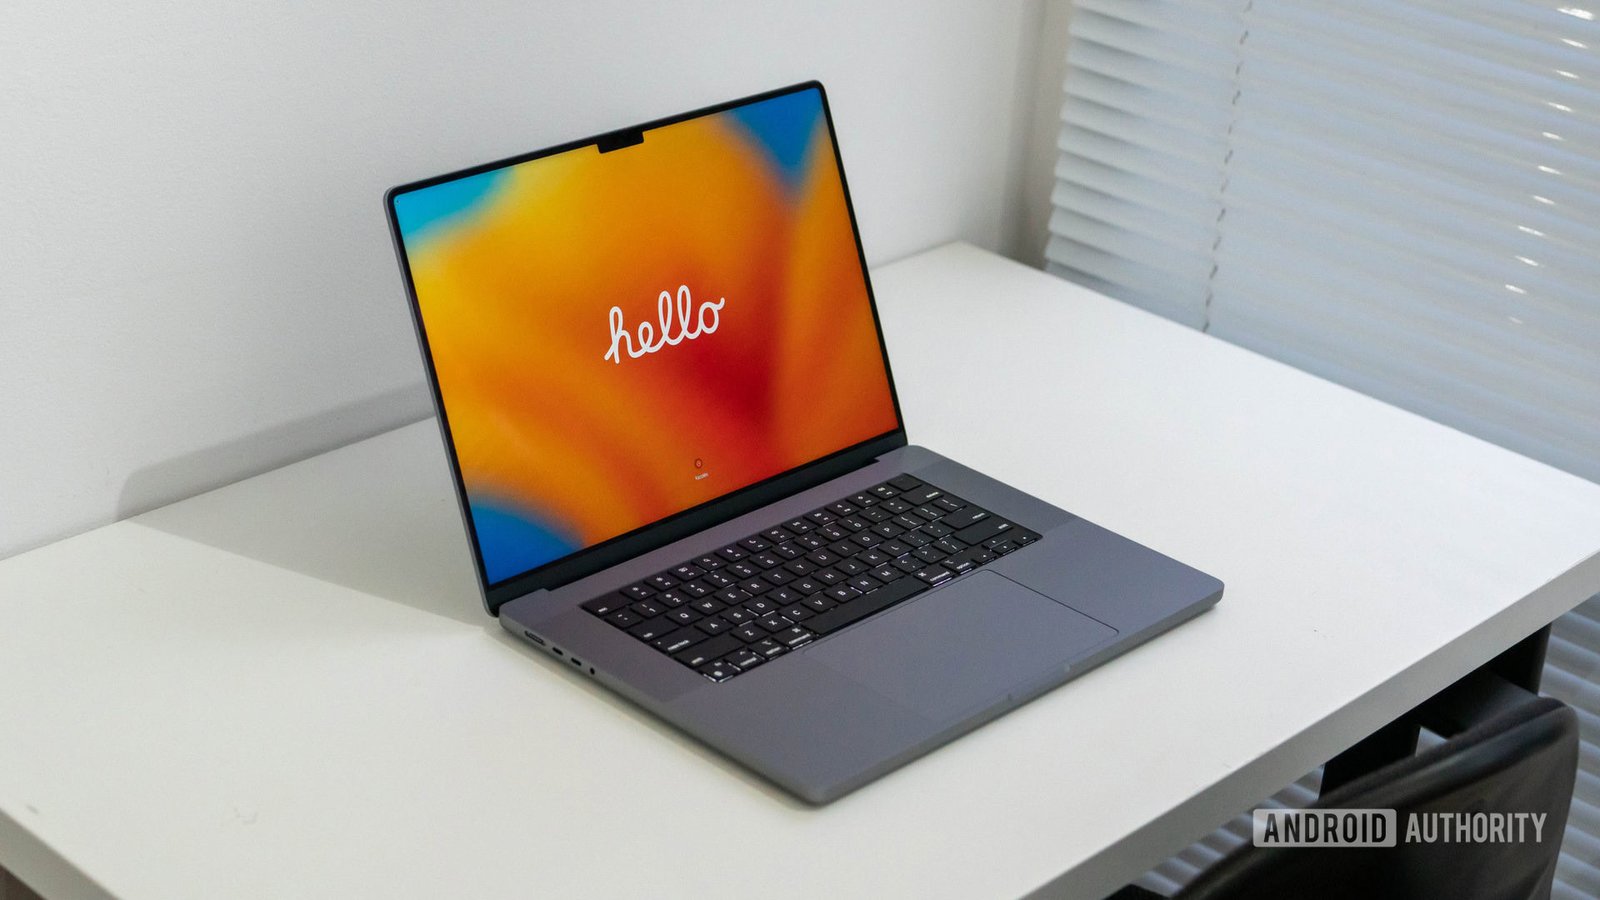 Deal: The best Apple MacBook Pros are $500 off